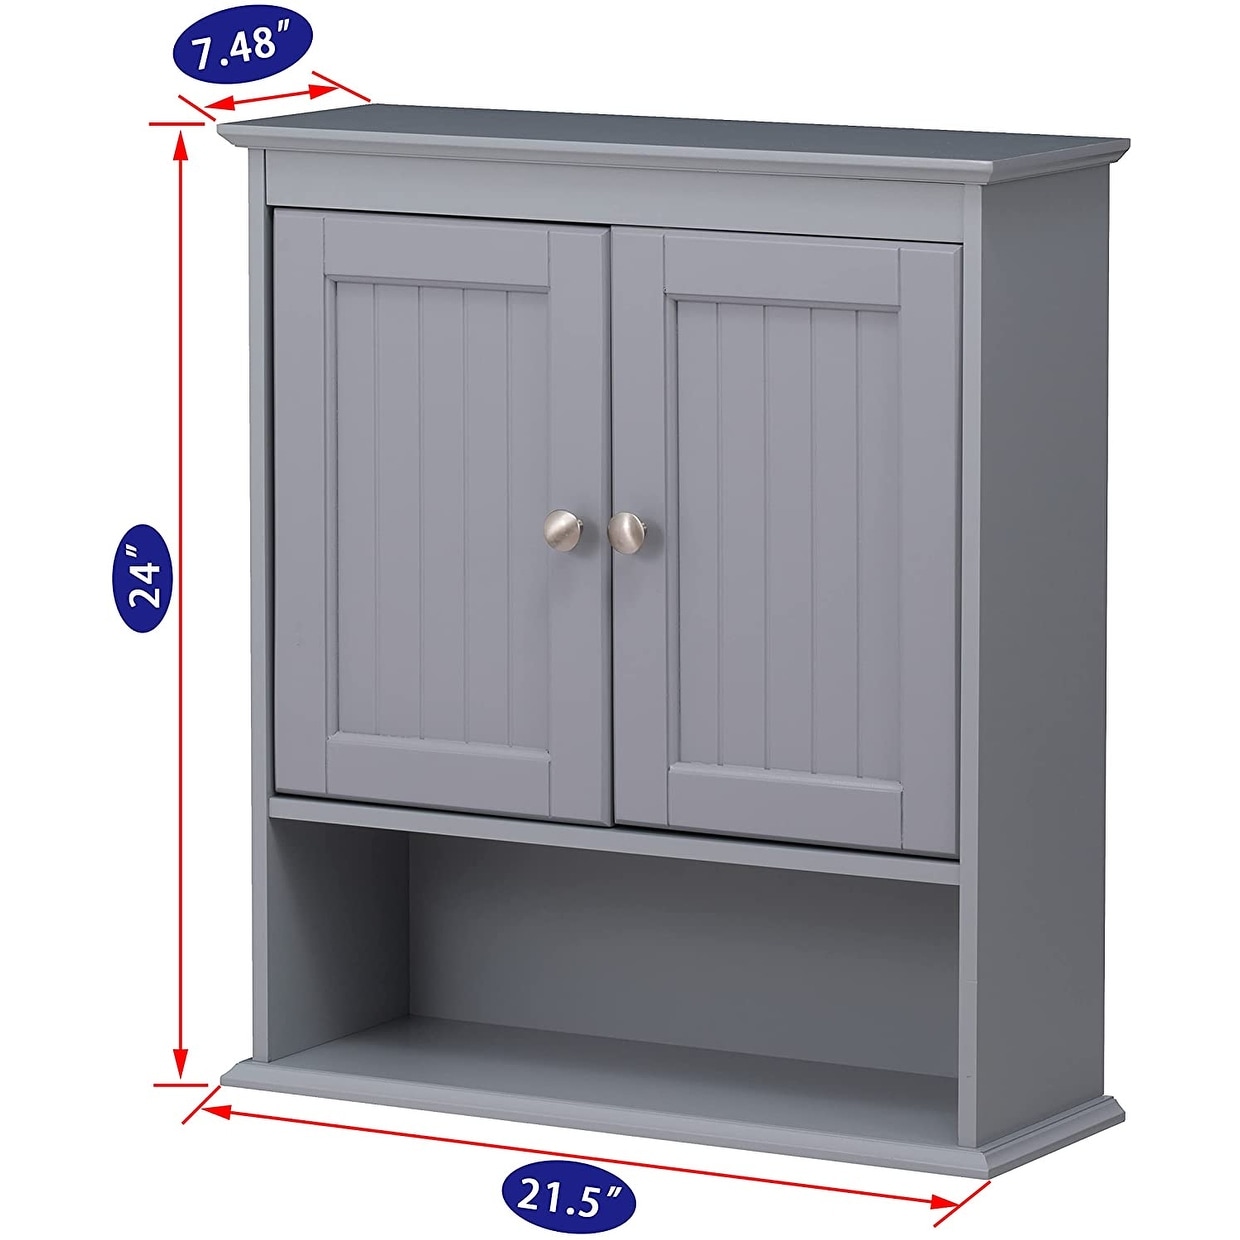 https://ak1.ostkcdn.com/images/products/is/images/direct/21efab66971b1b980e45a03f0b494cc7a8e2a13b/Spirich-Bathroom-Wall-Spacesaver-Storage-Cabinet-Over-The-Toilet-with-Door-%2C-Wooden%2C-White.jpg